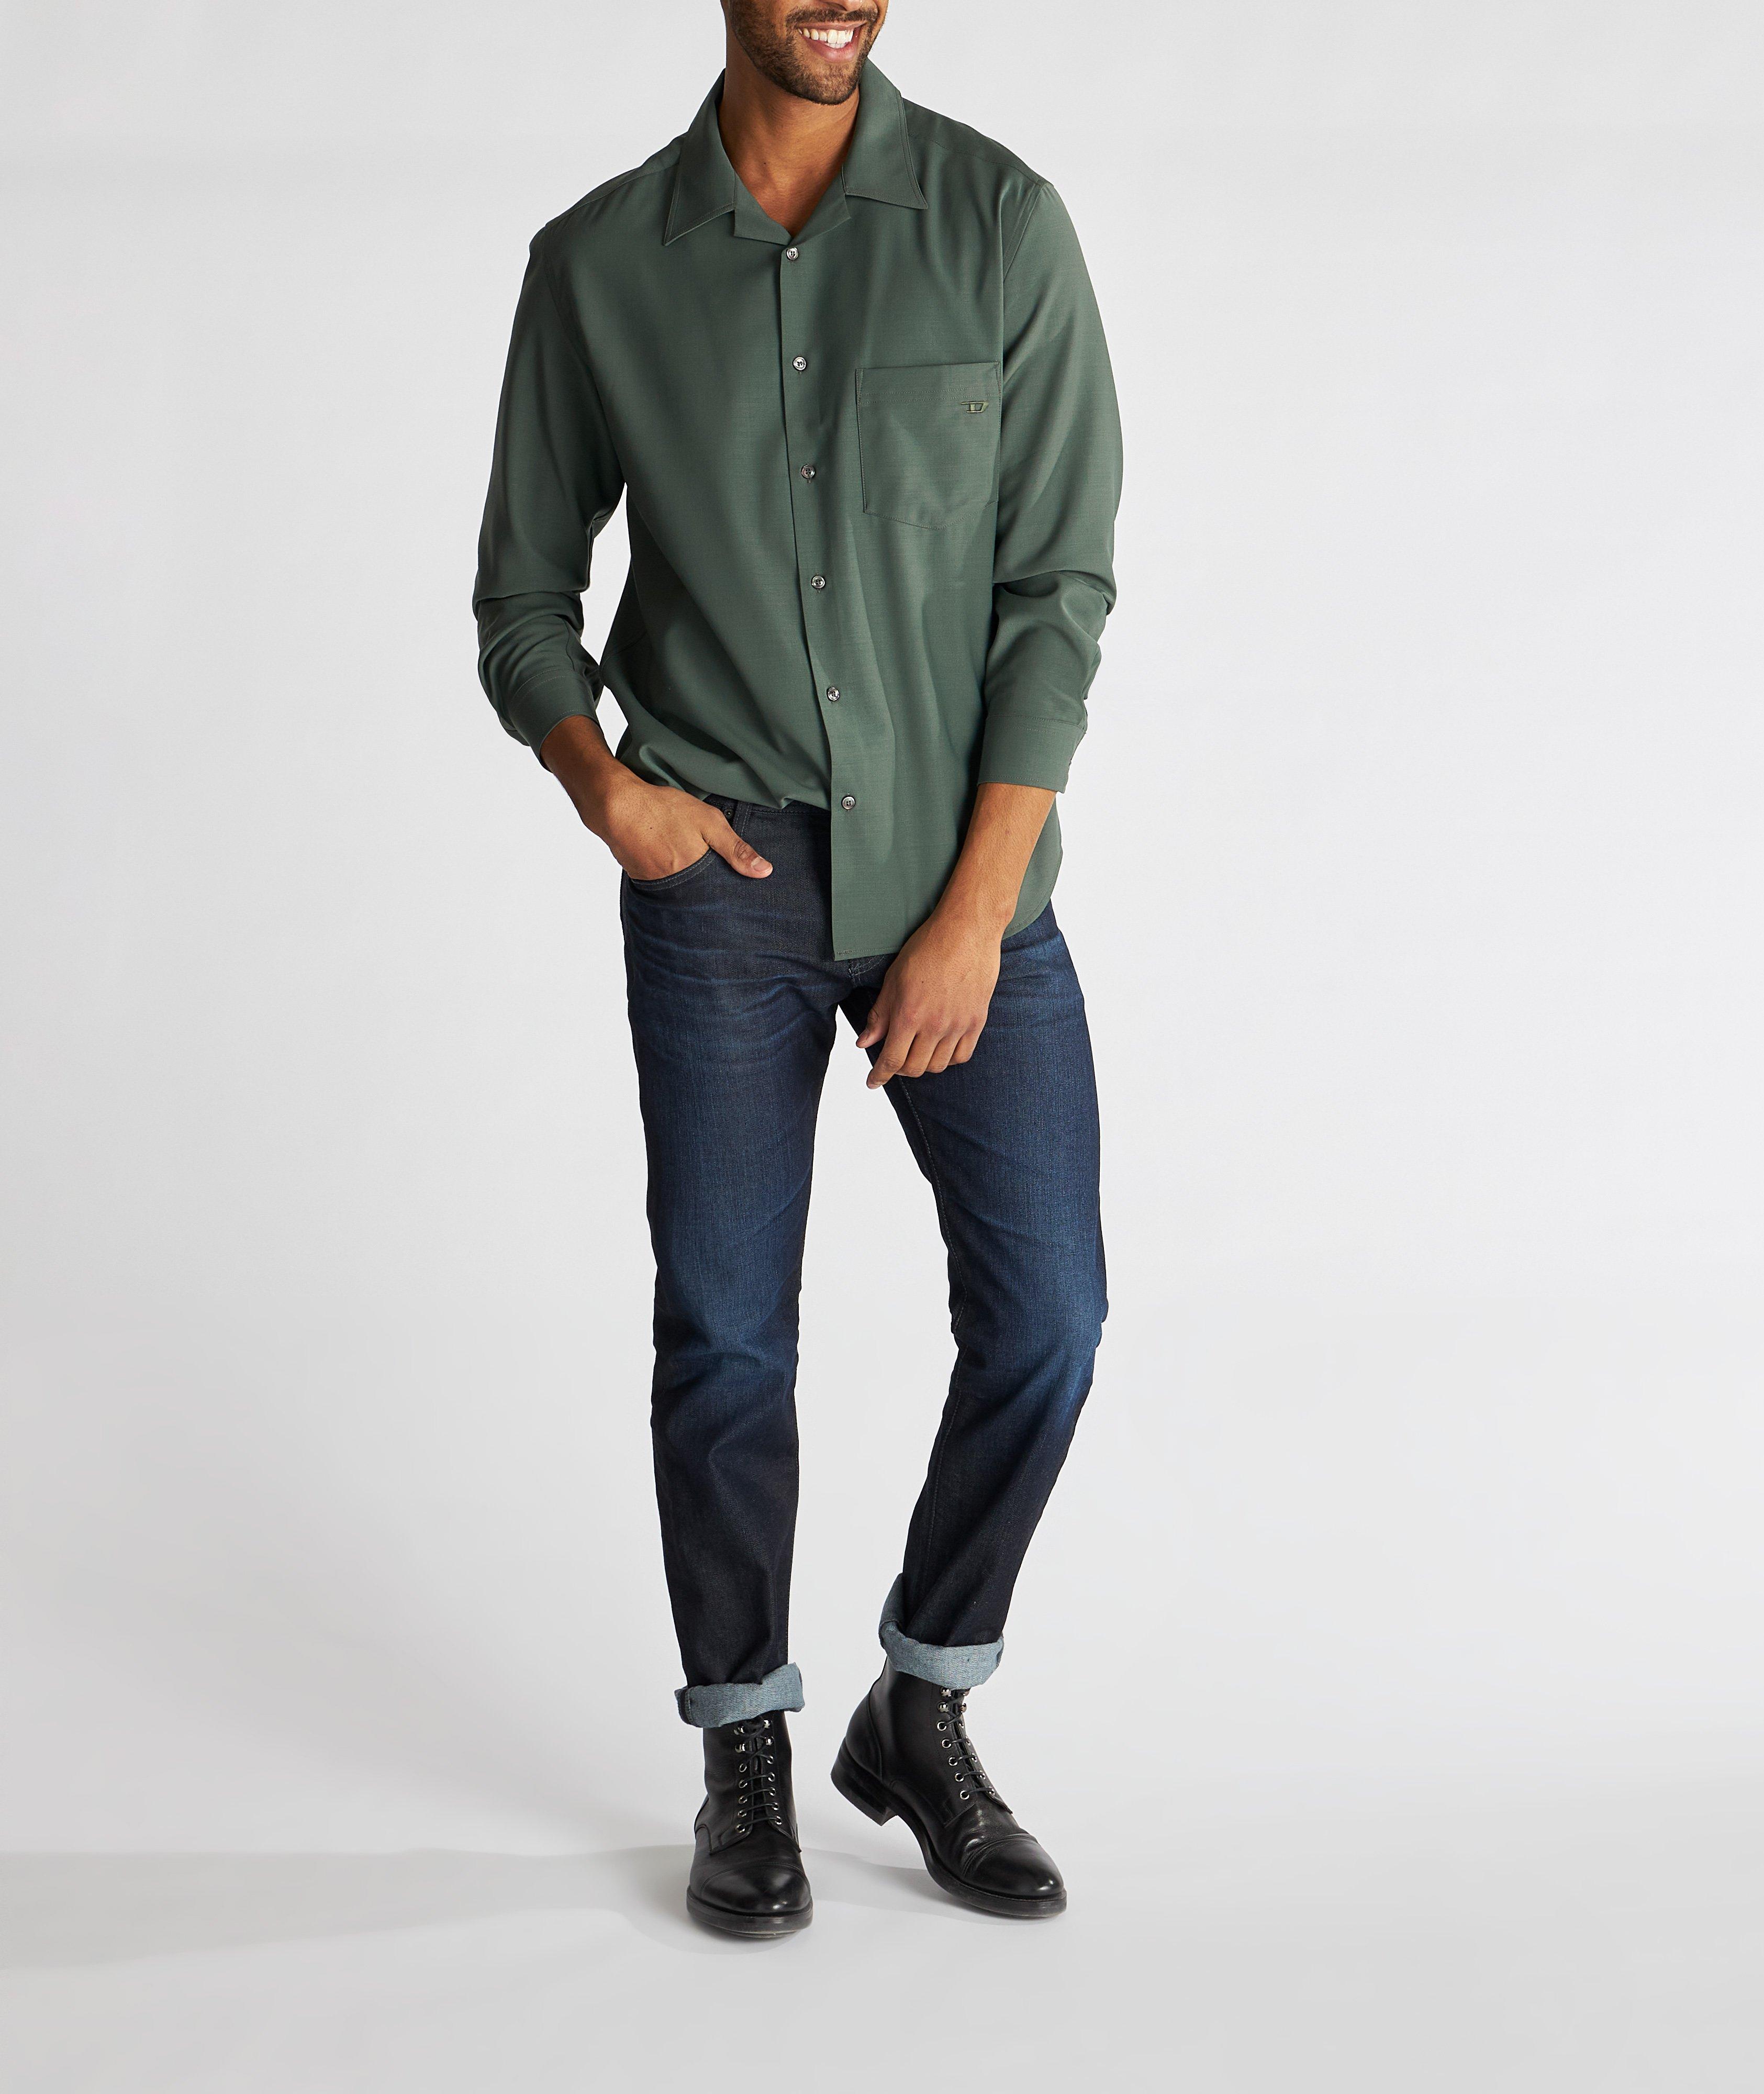 S-Wooly Chest Pocket Wool-Blend Shirt image 3